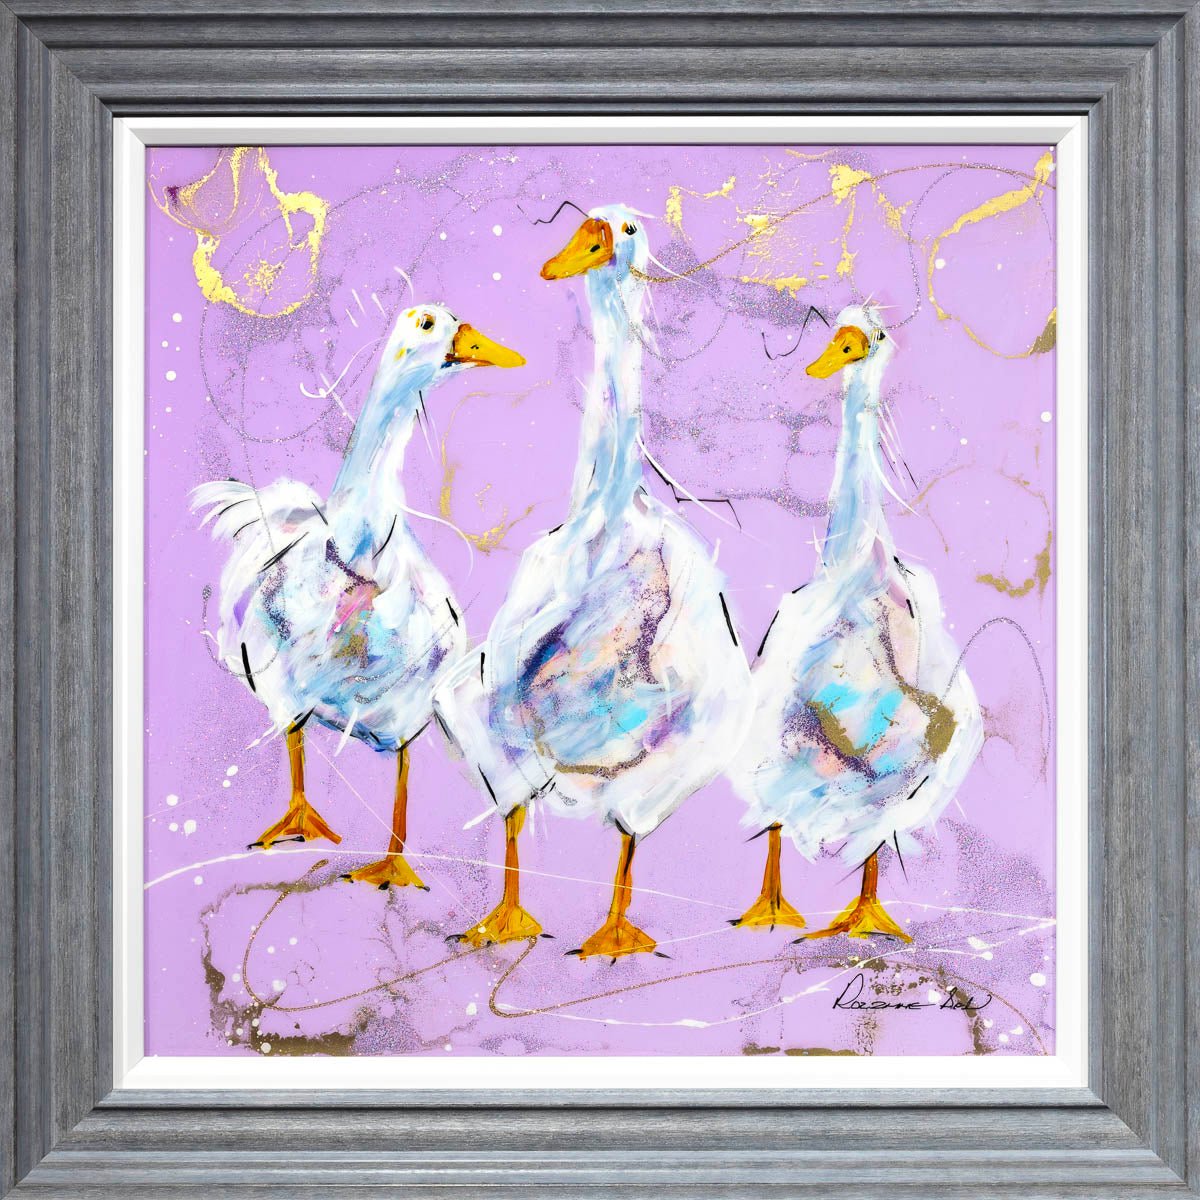 Waddle Along Now - Original Rozanne Bell Original